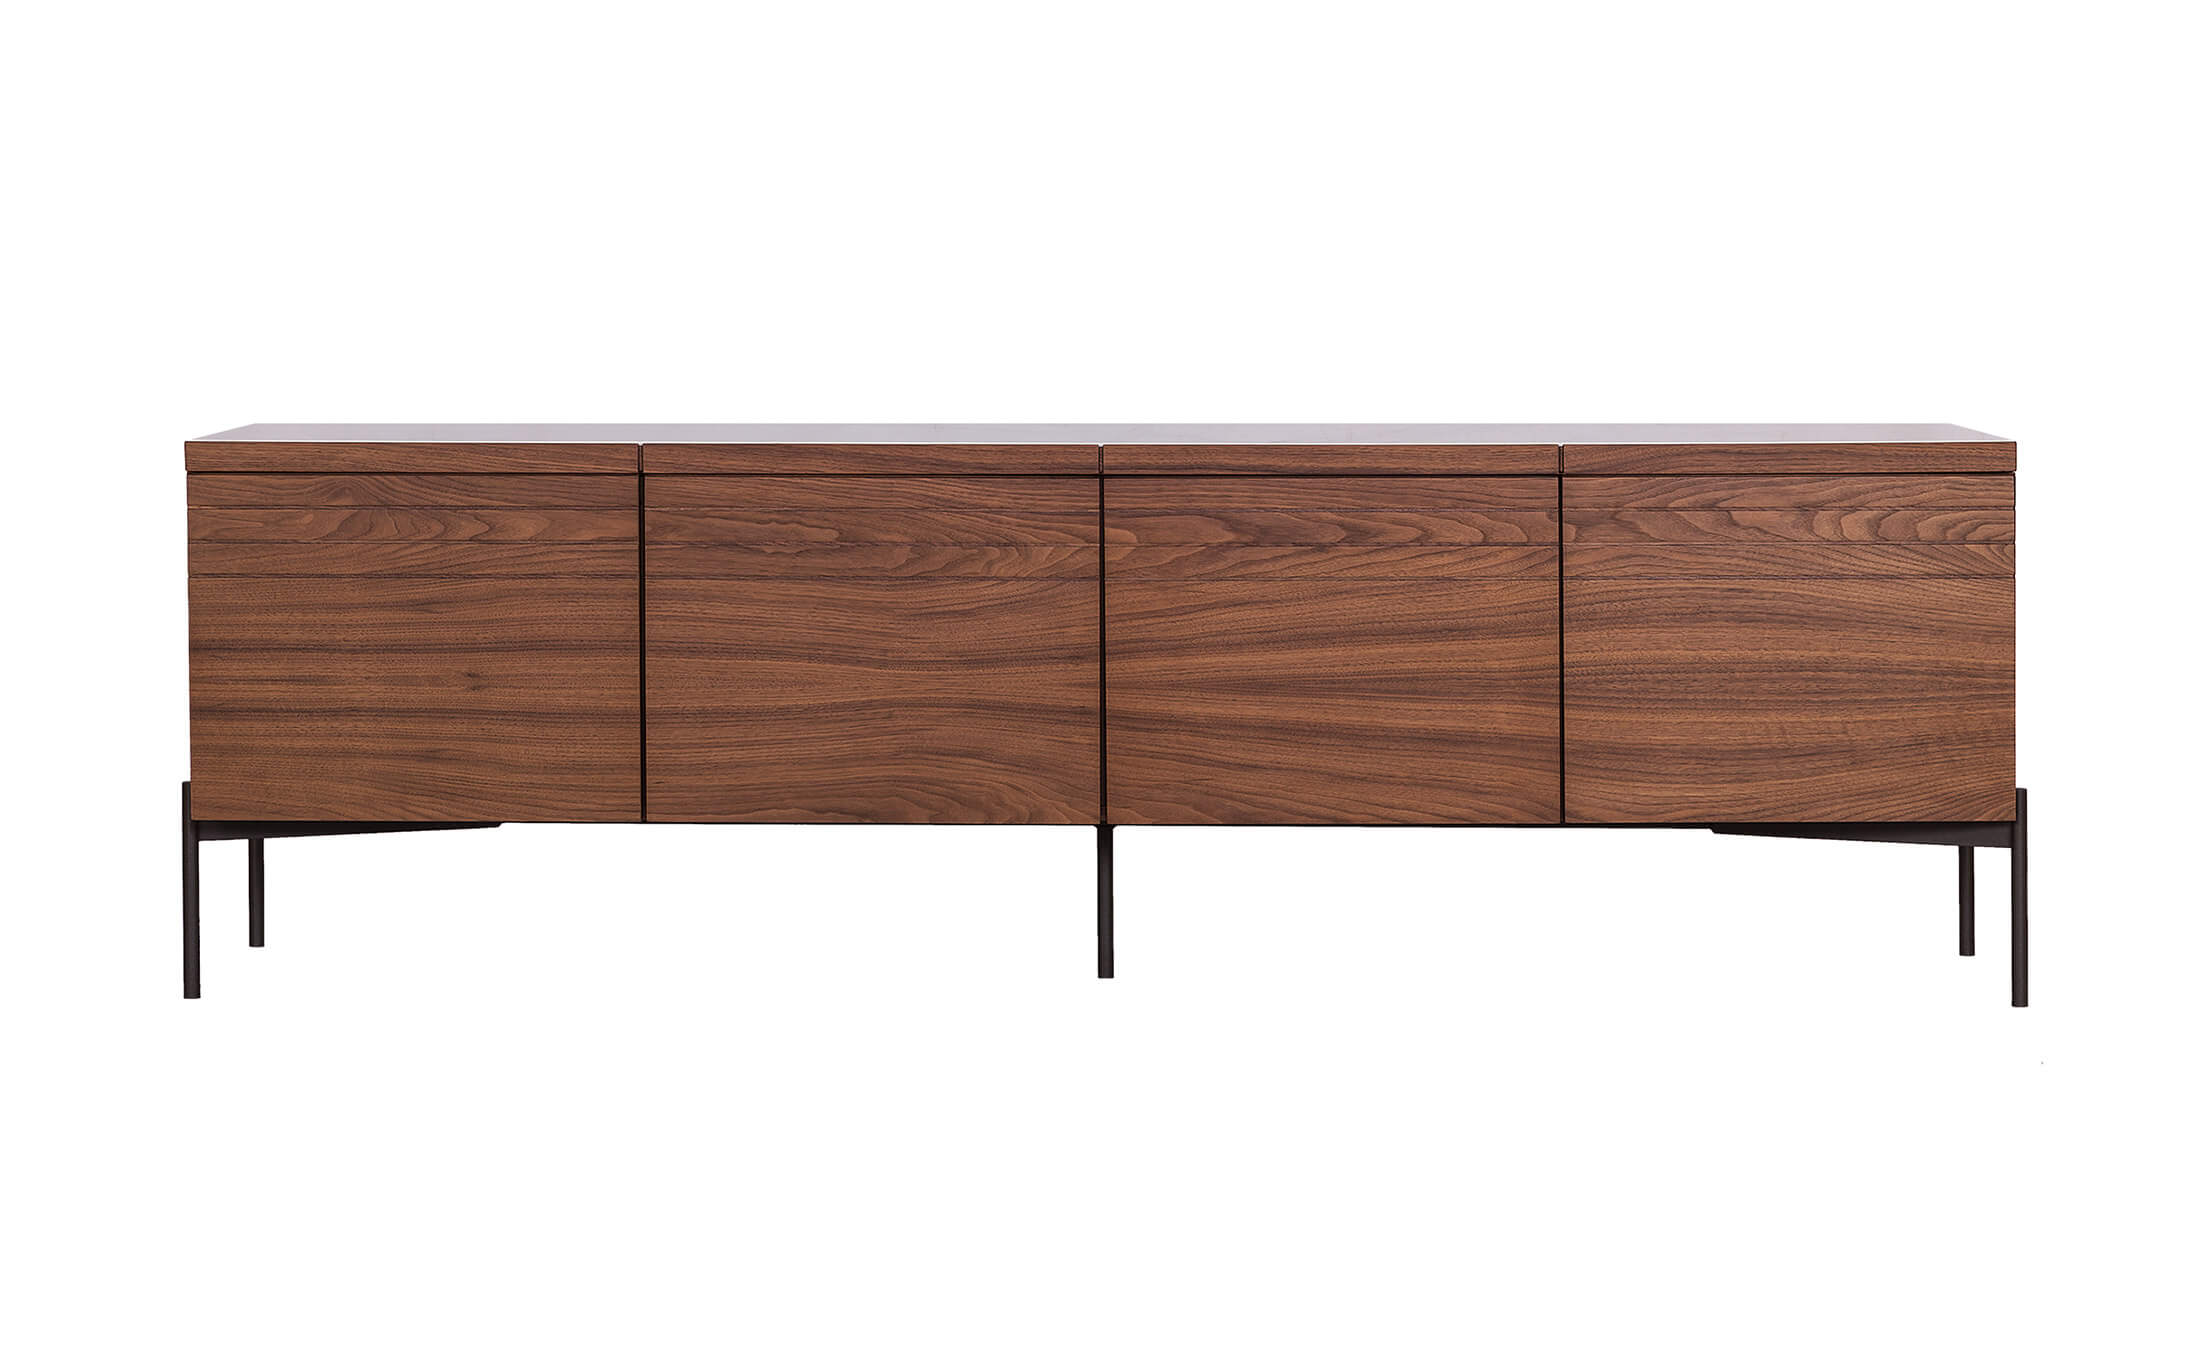 O-rizon sideboard in walnut and ceramic top. al2,art for living